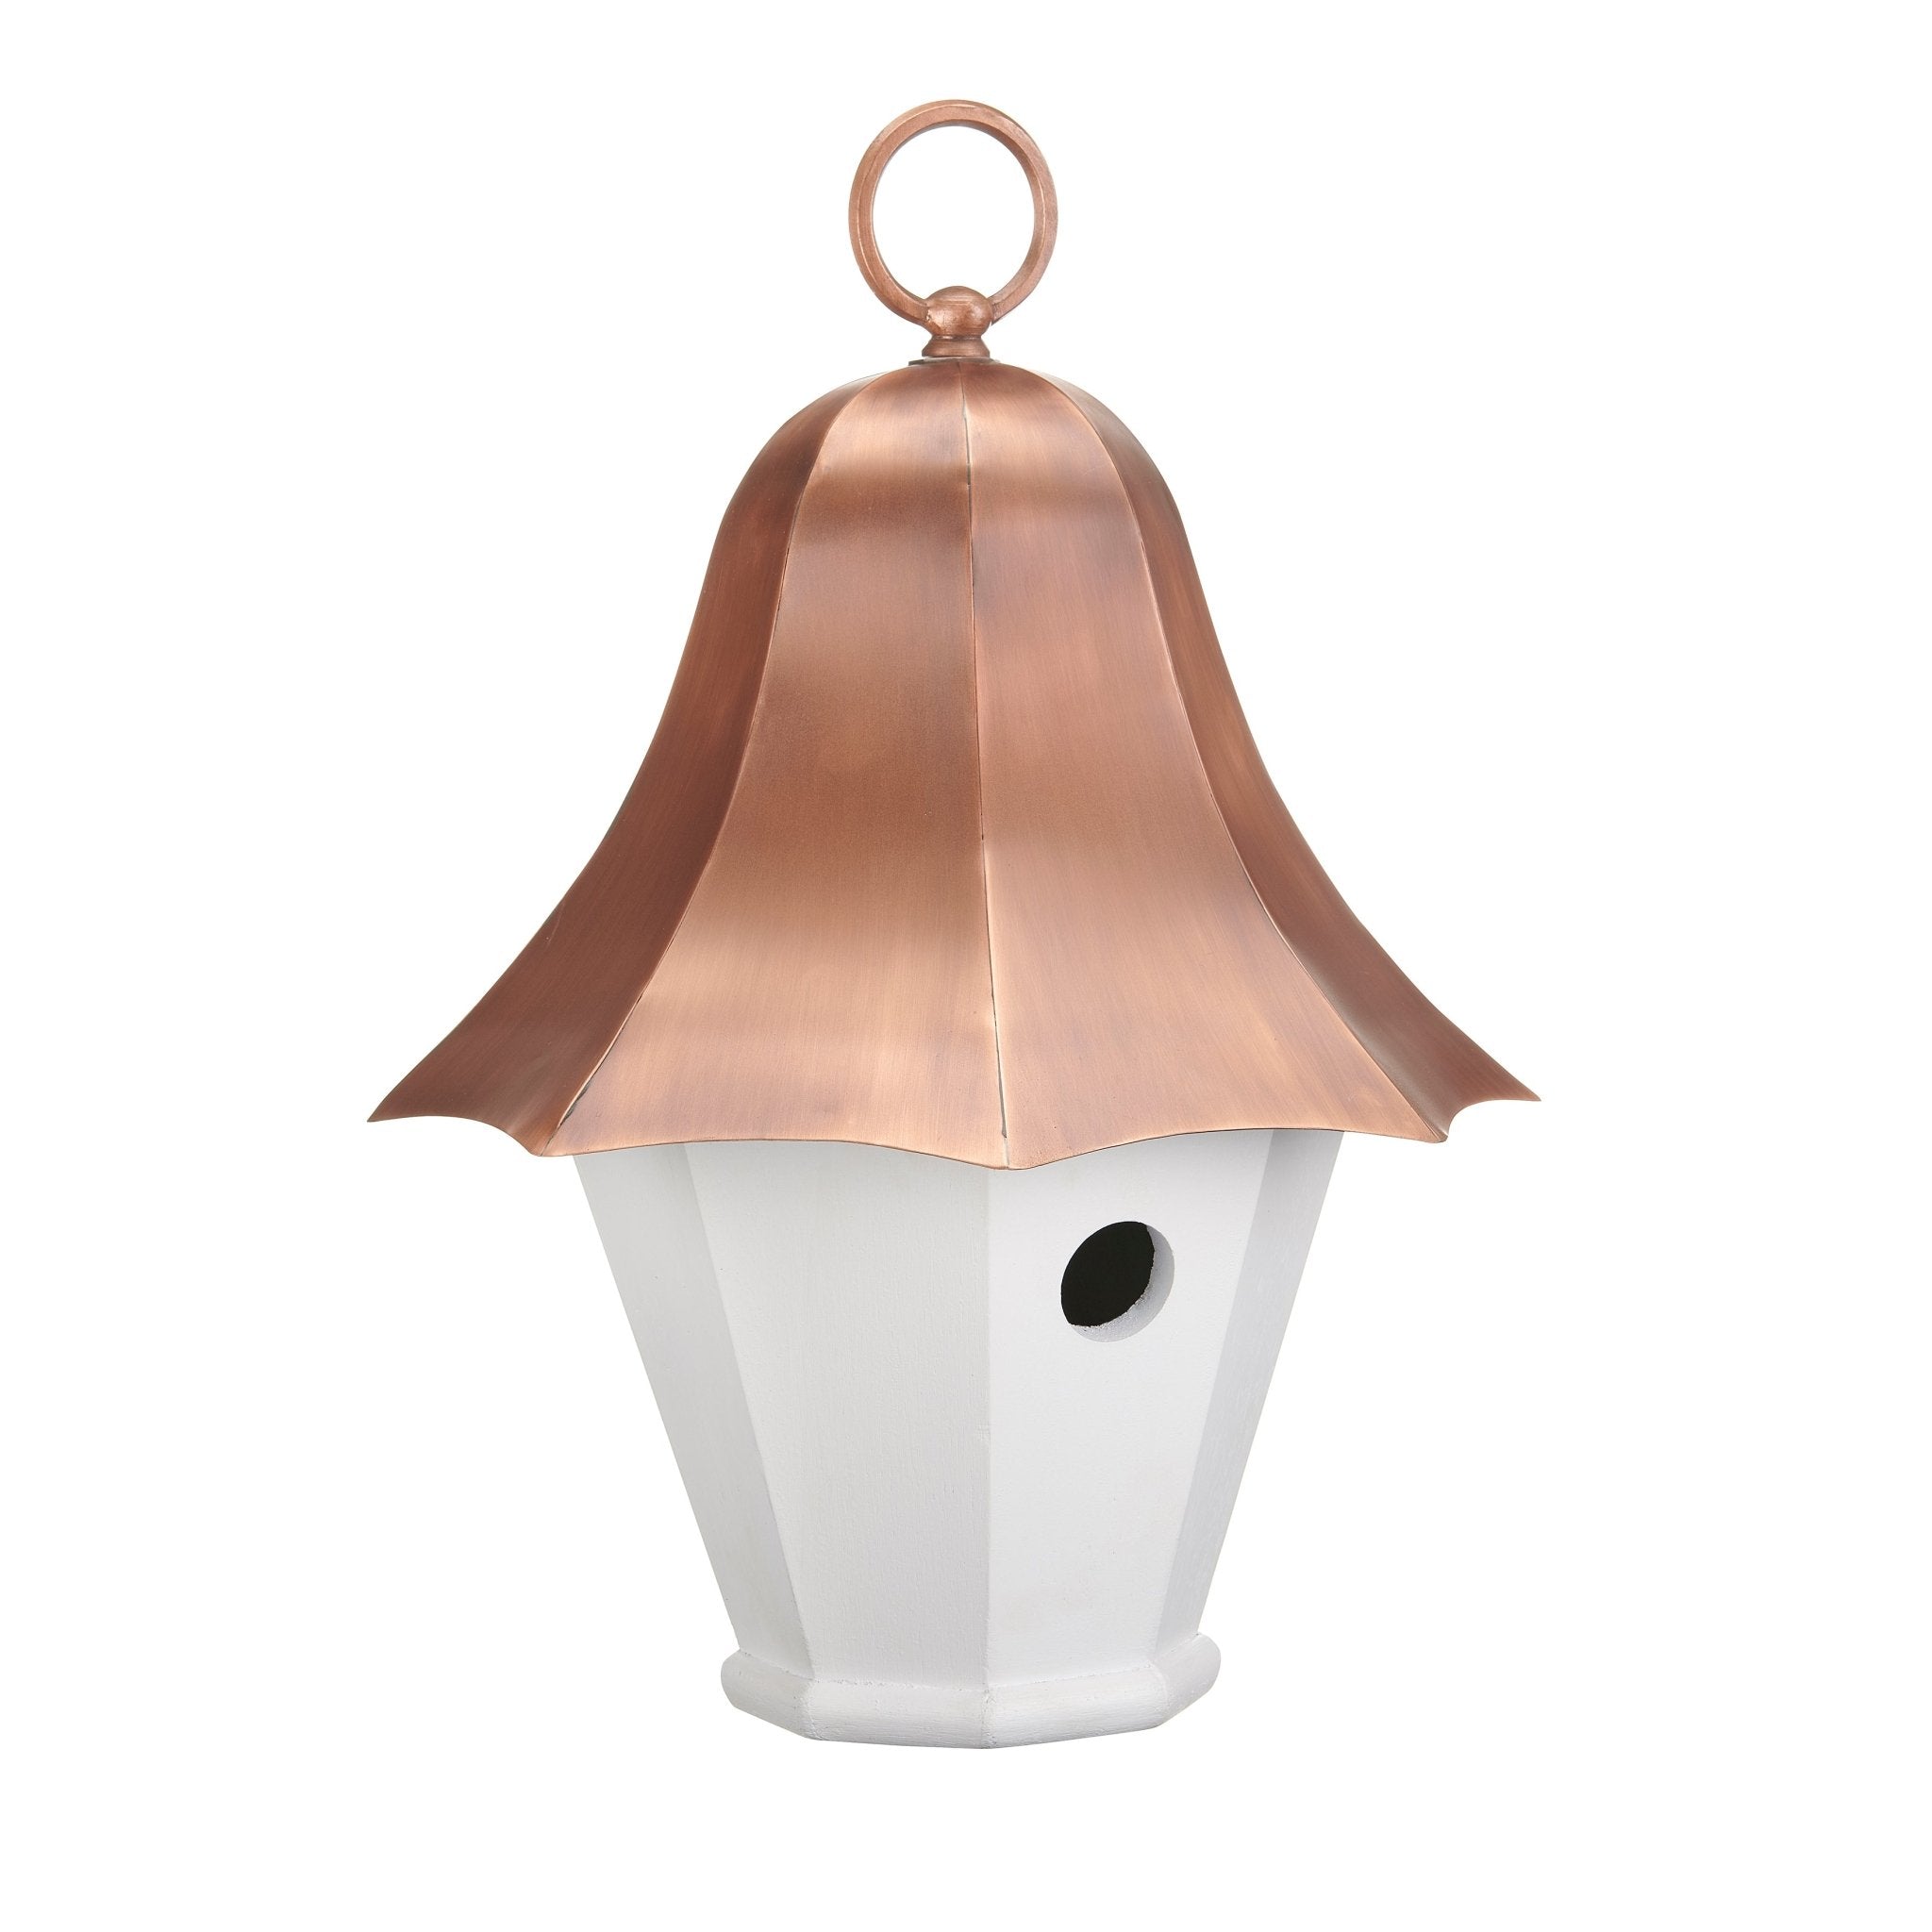 Bell Top Bird House - Copper Finish Roof - Good Directions